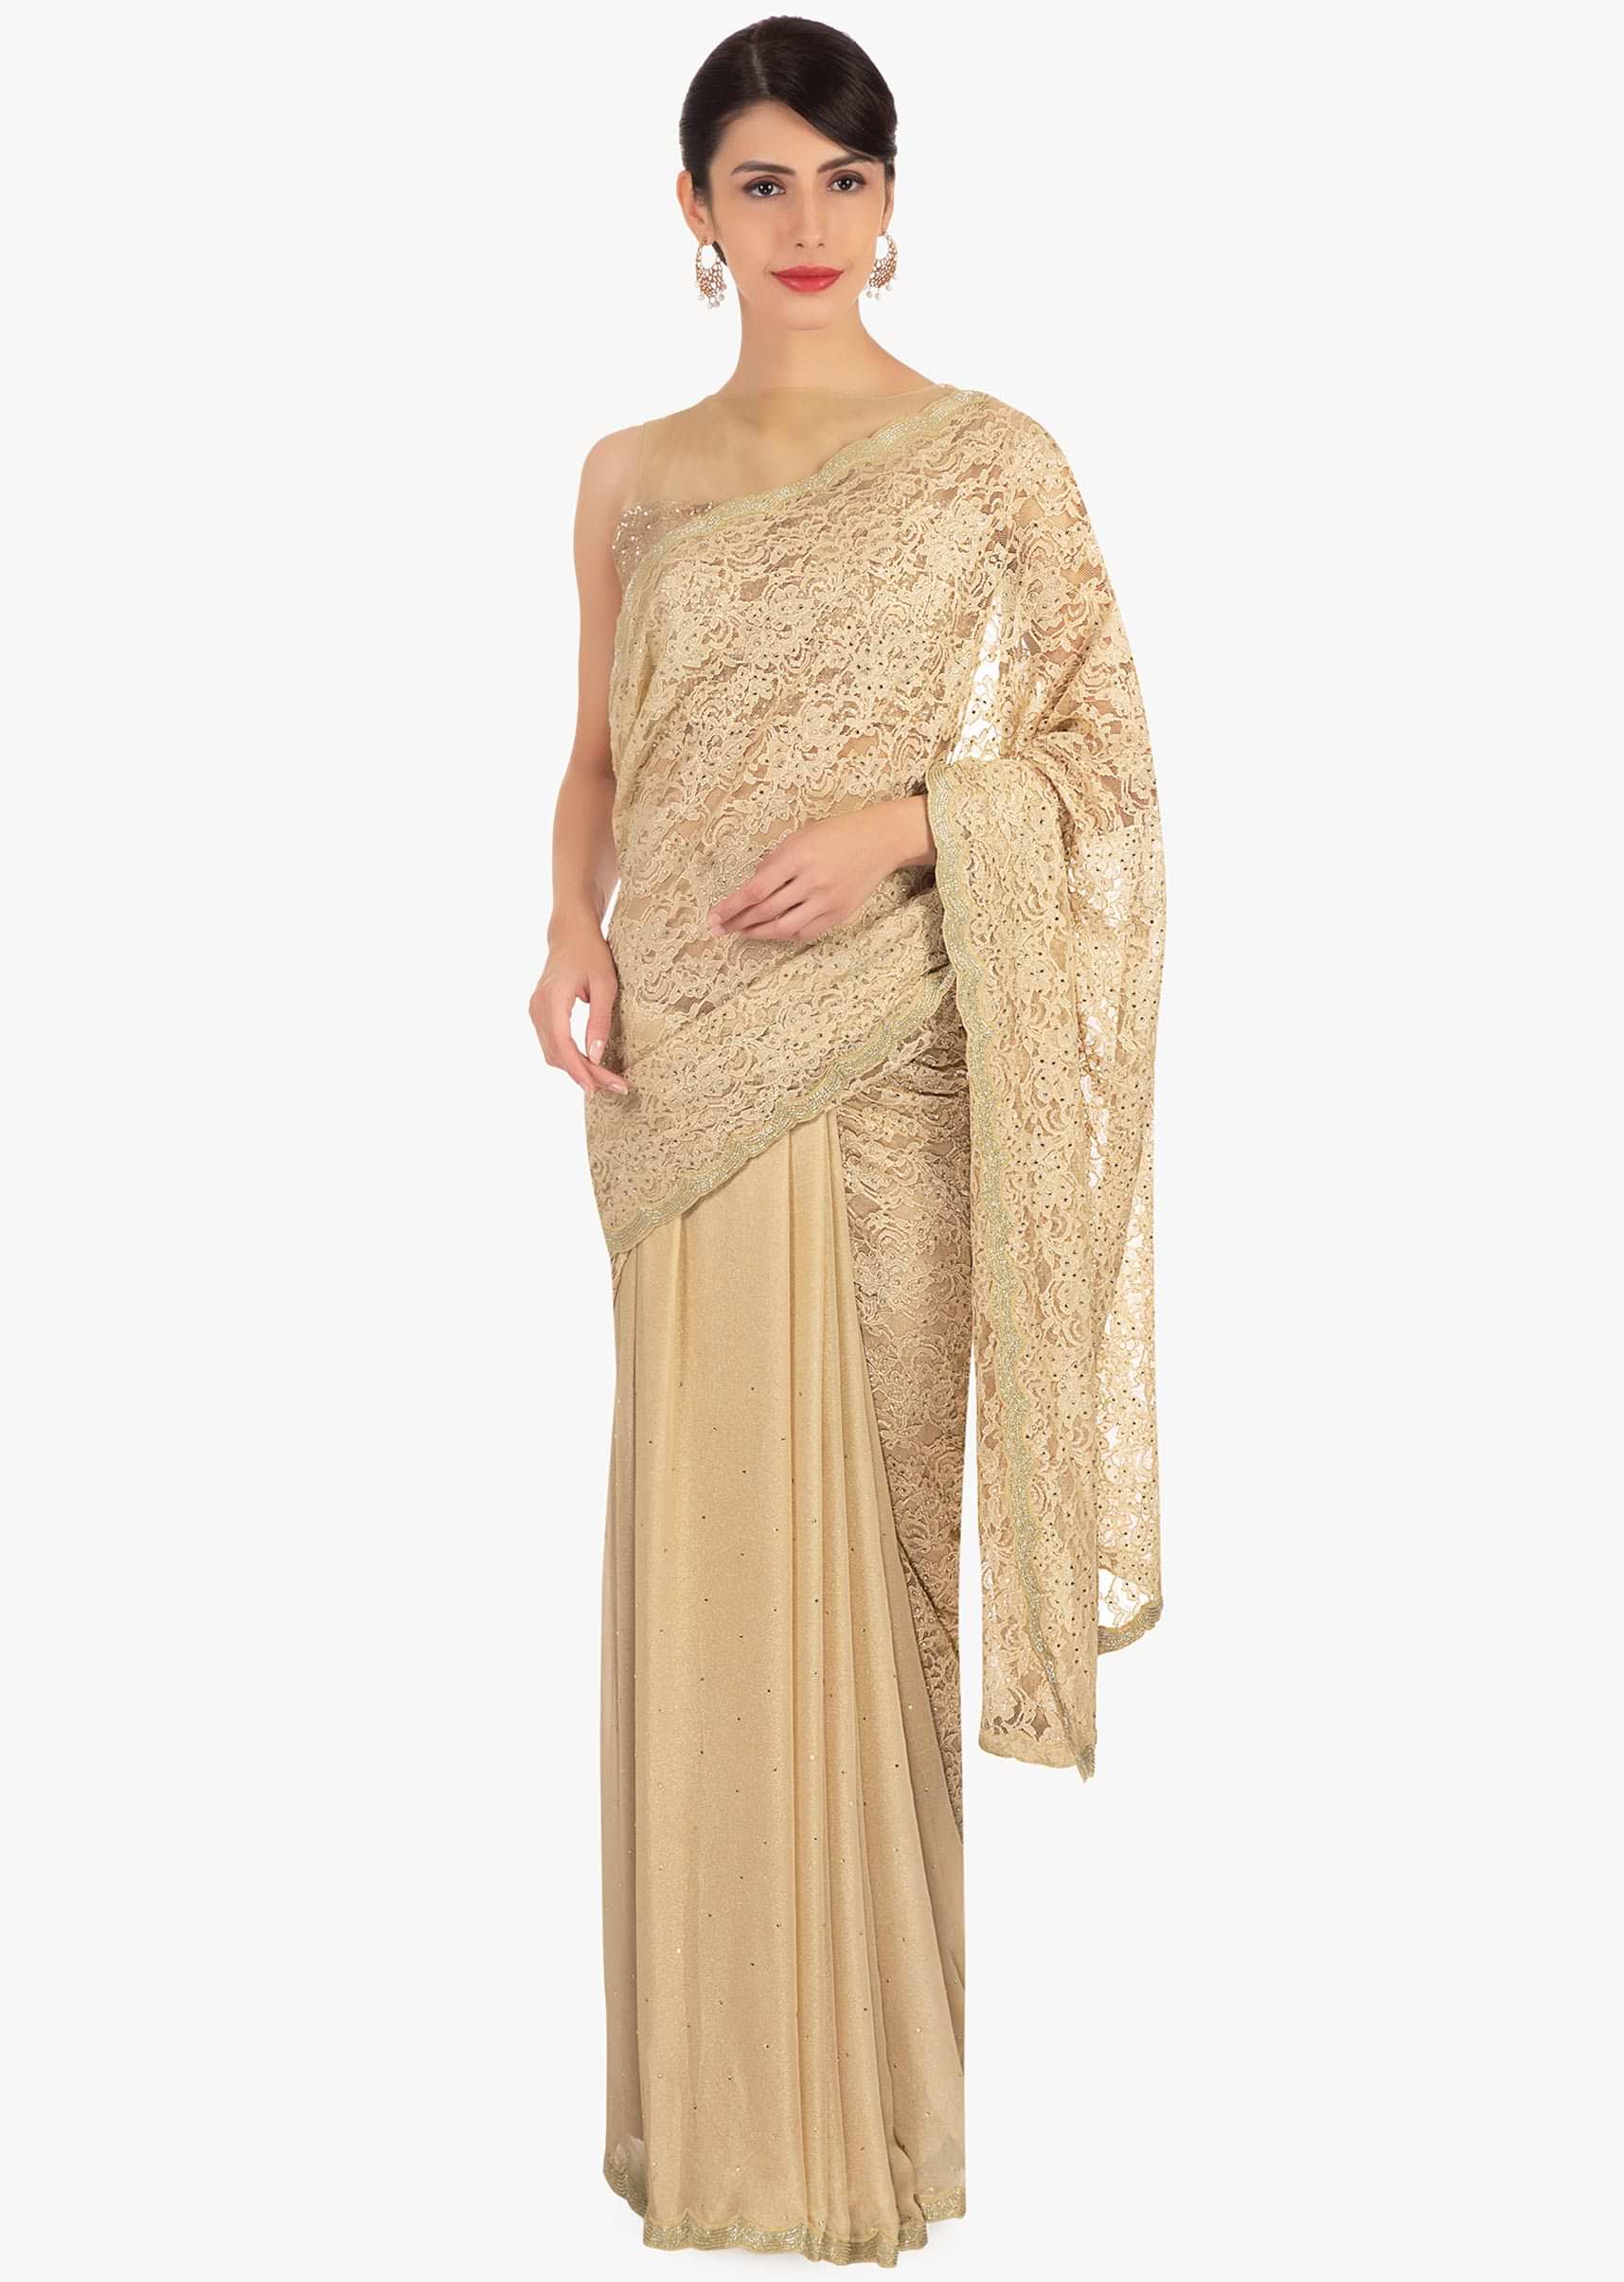 Half and half beige chantilly lace and chiffon saree